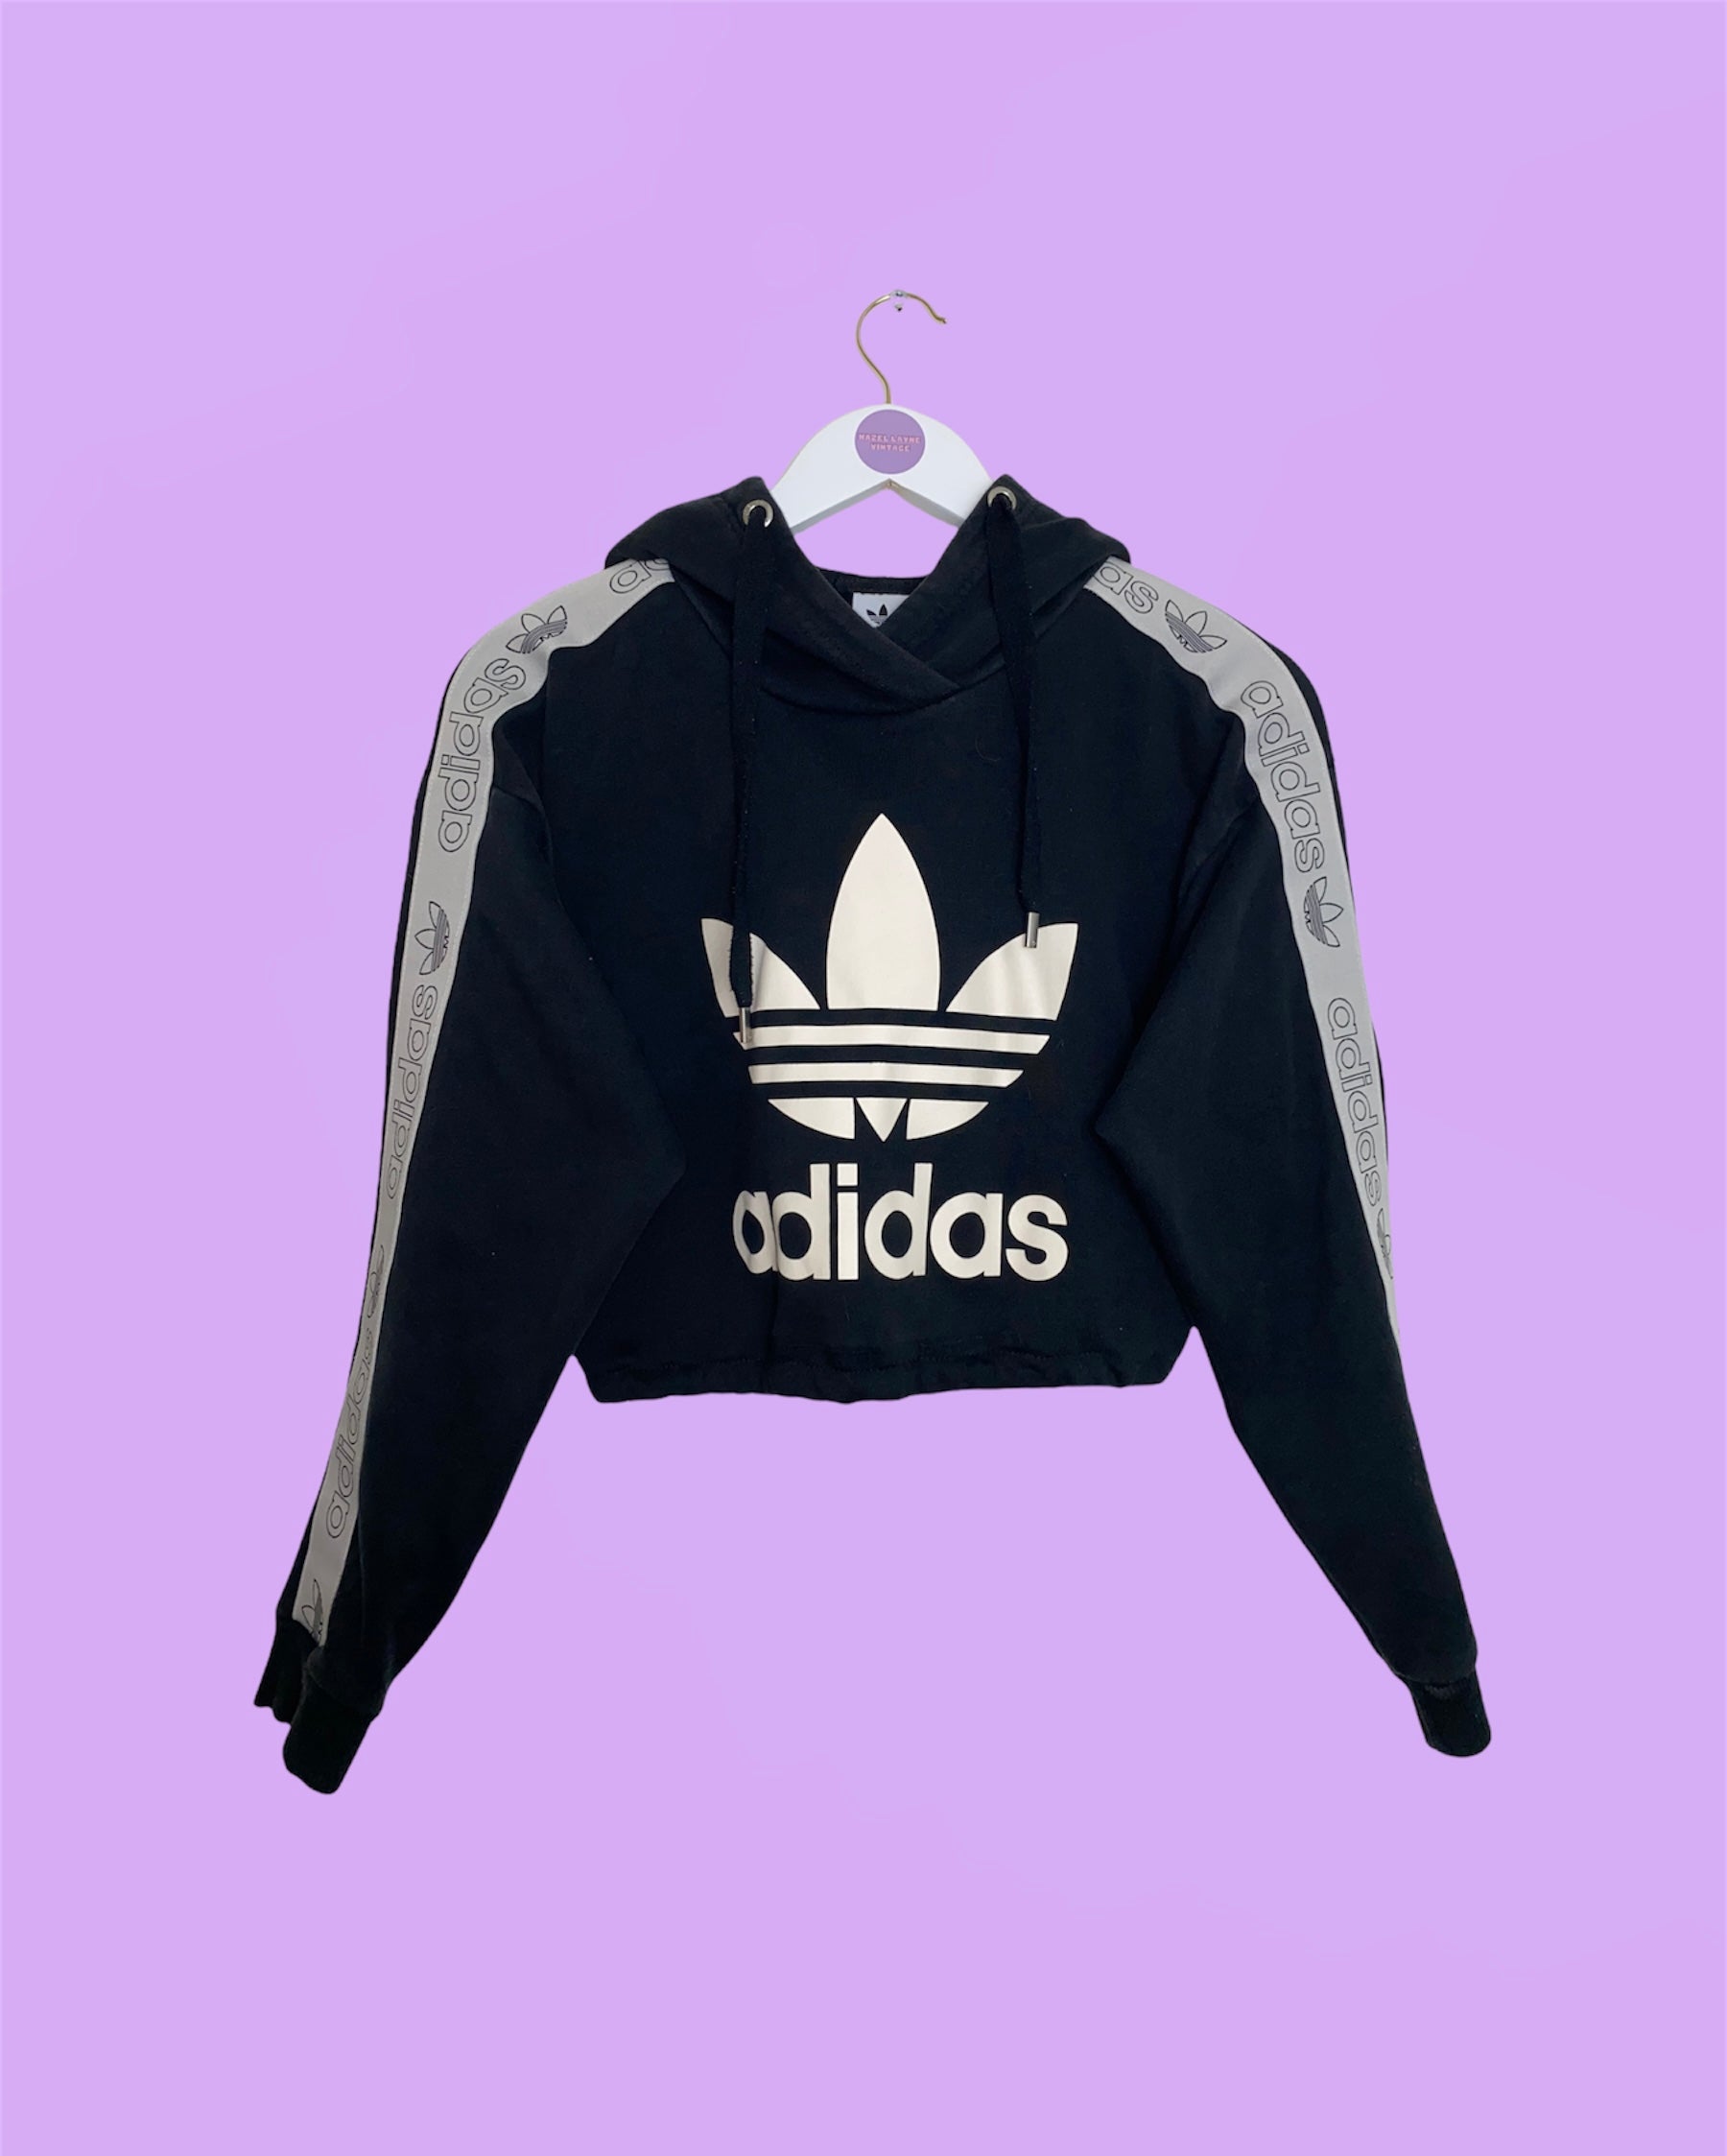 black cropped hoodie with big white adidas logo shown on a white clothes hanger on a lilac background